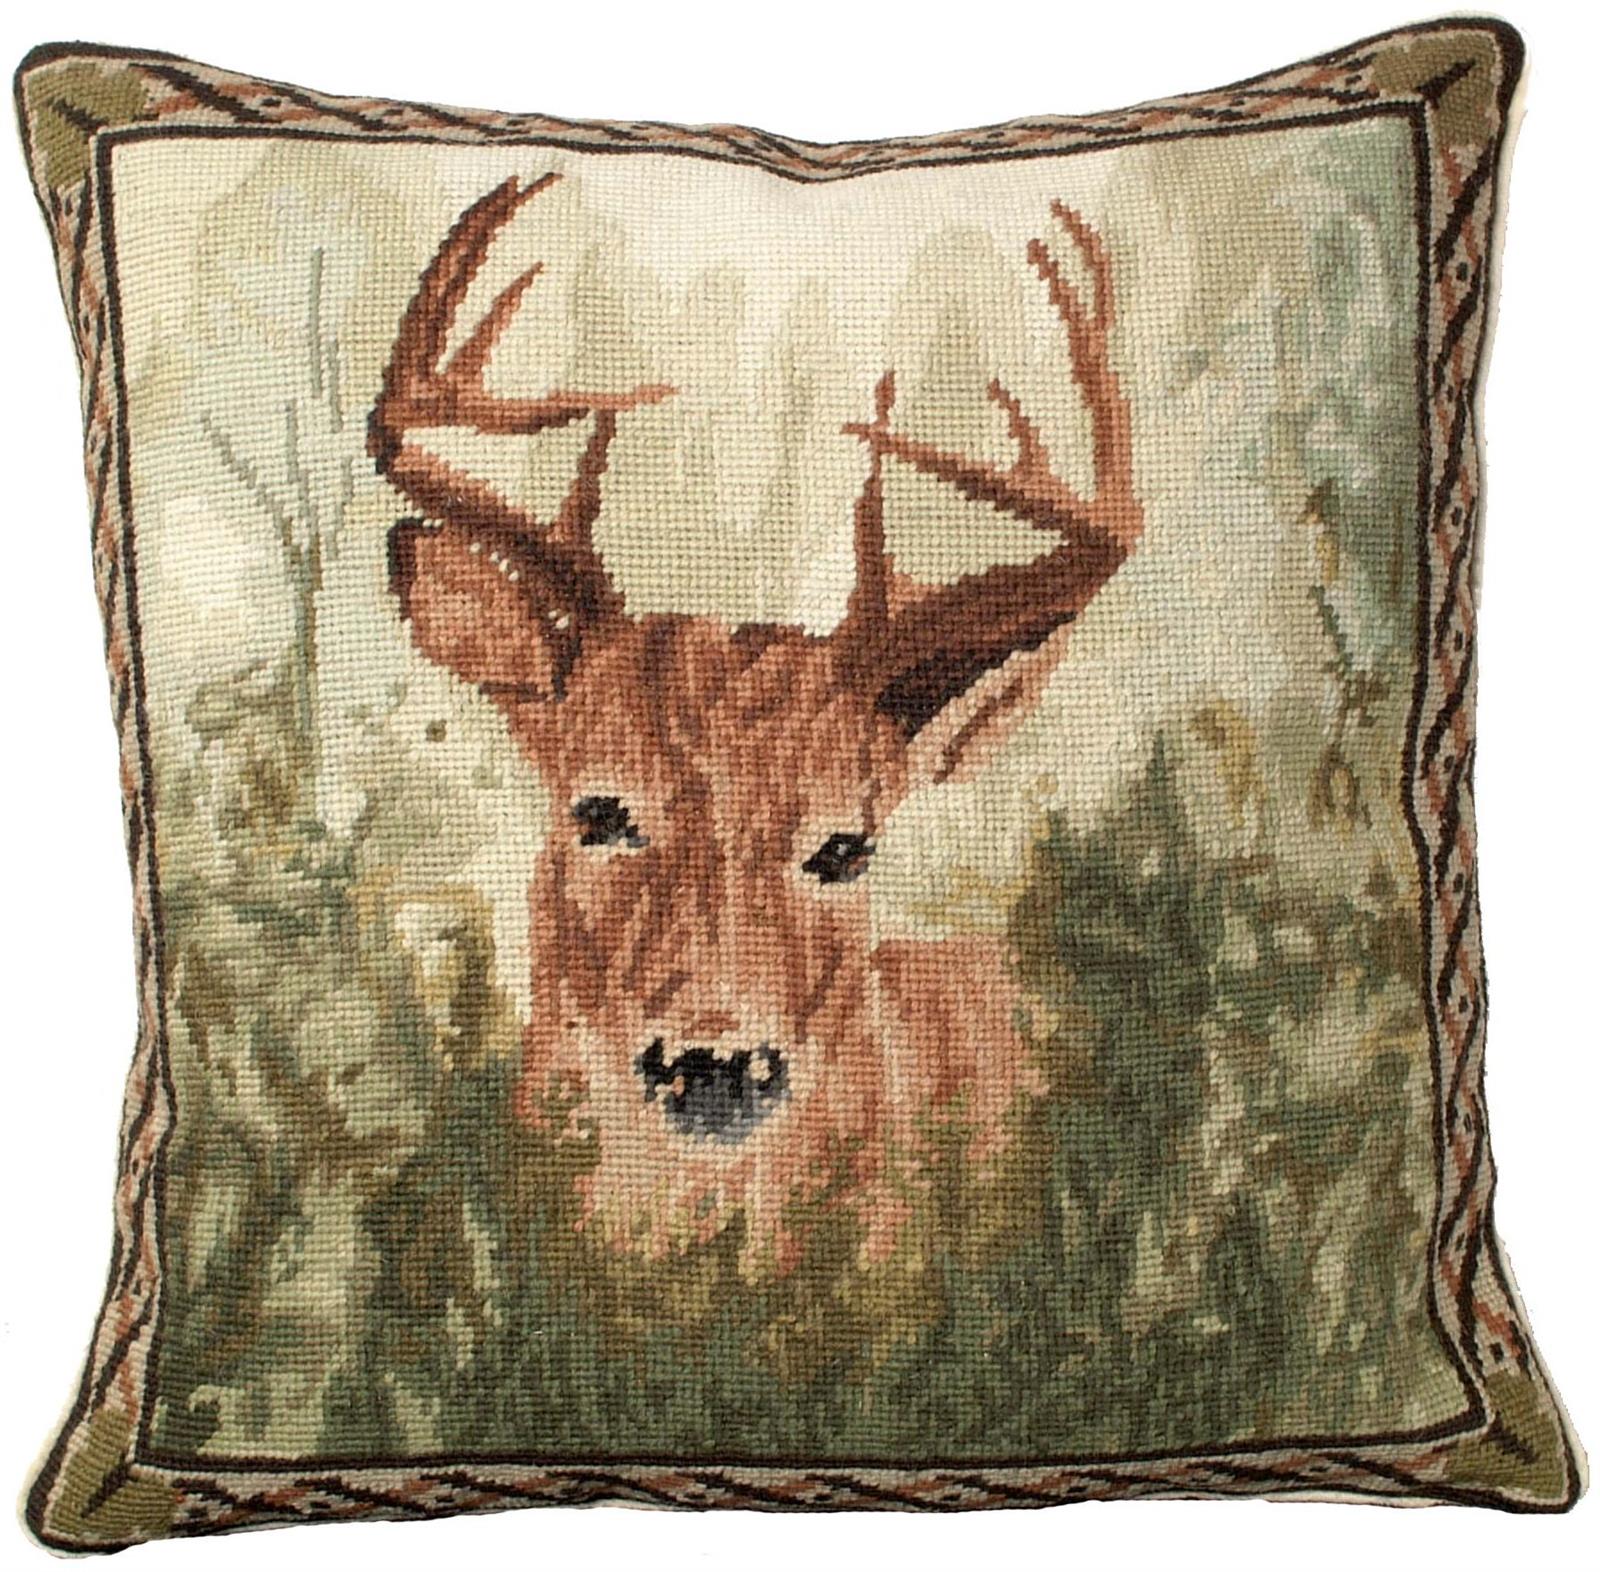 Throw Pillow Needlepoint Stag in Forest 18x18 Beige Wool Cotton Velvet-Image 3